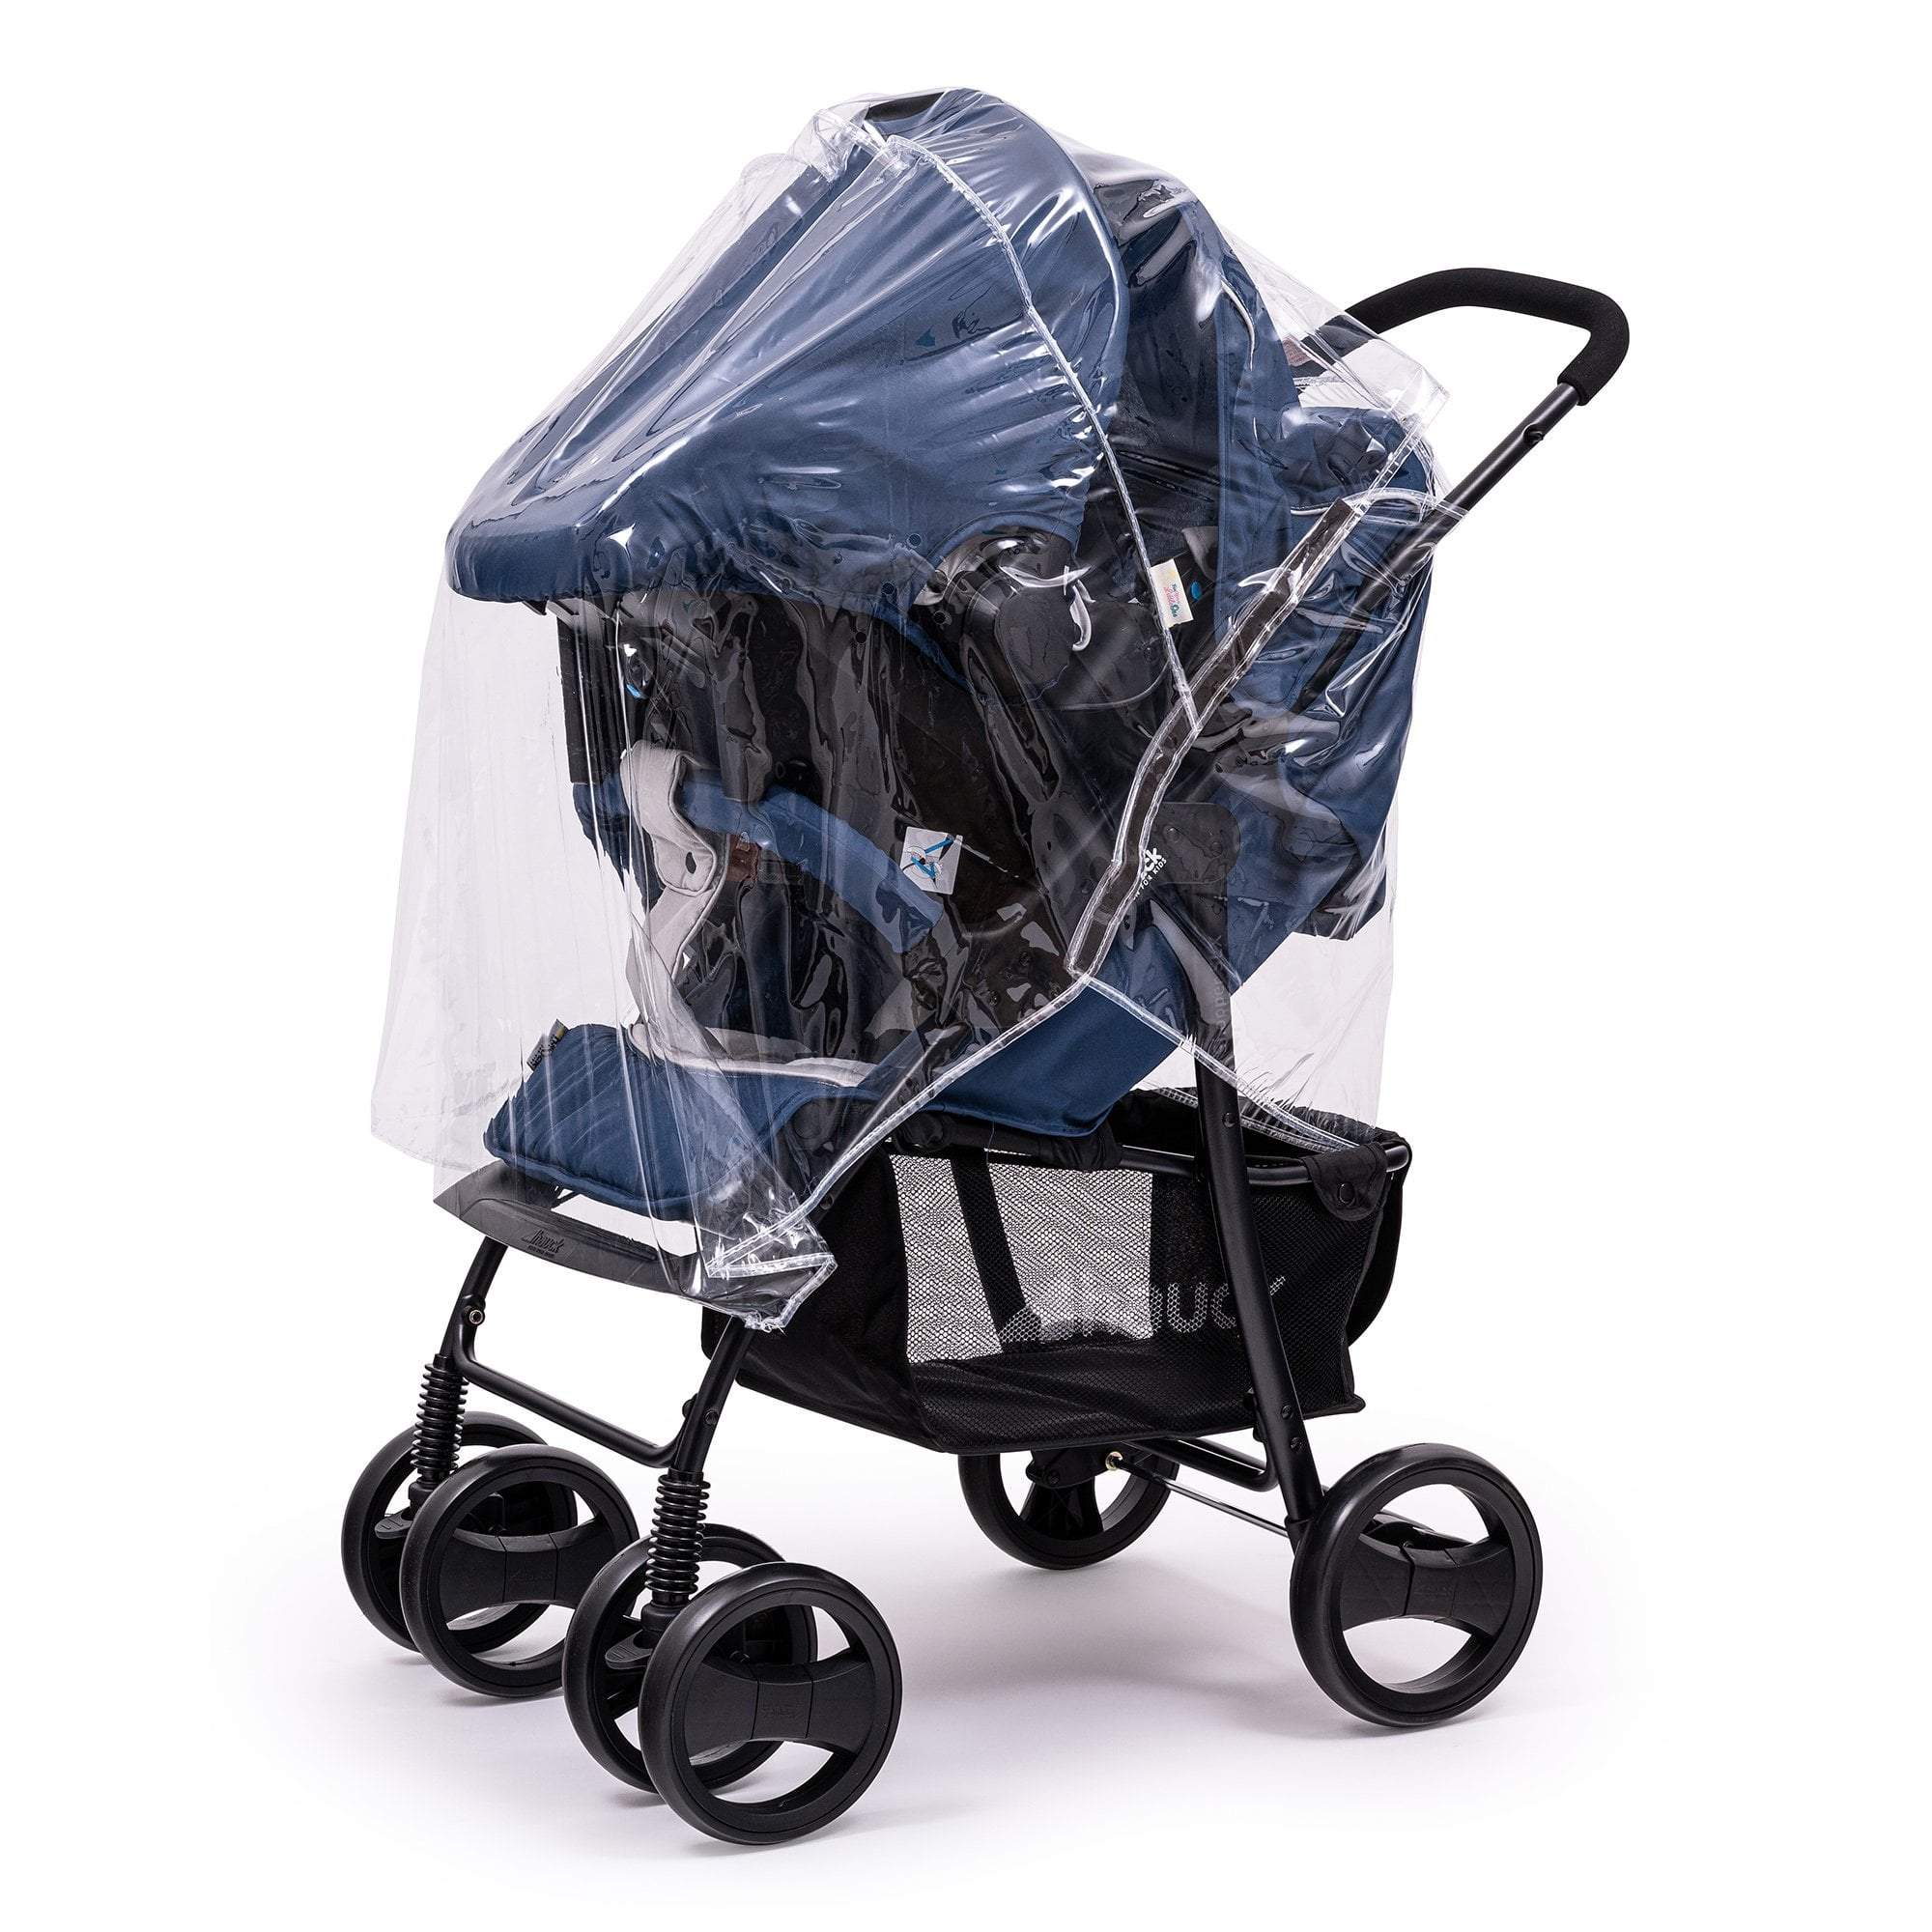 Travel System Raincover Compatible with Urban Detour - Fits All Models - For Your Little One